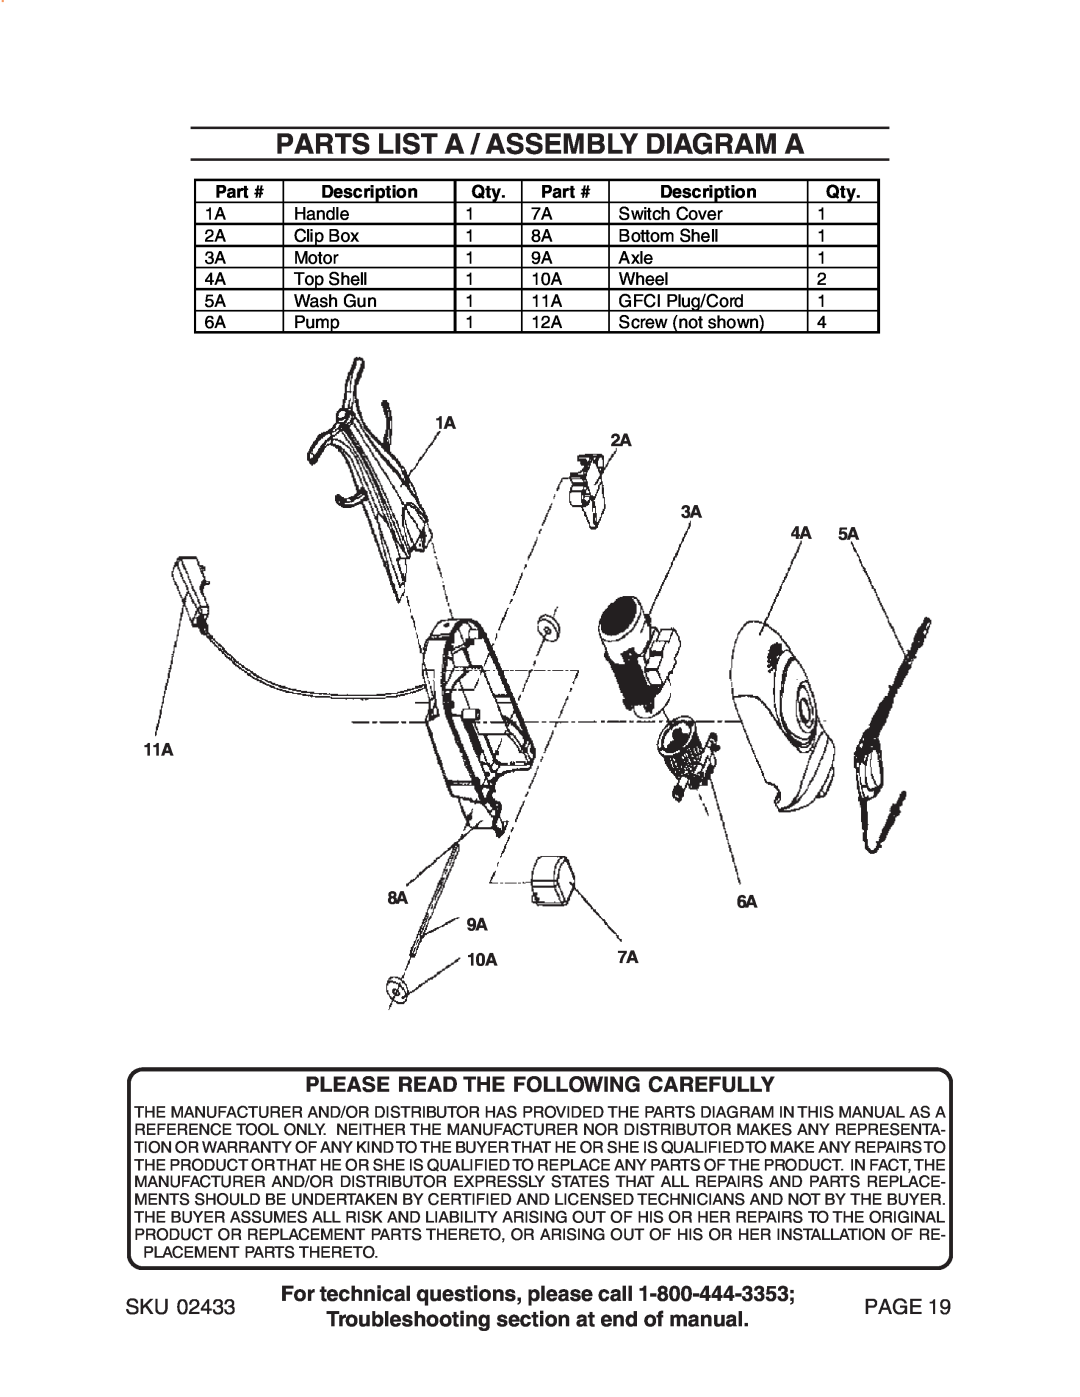 Harbor Freight Tools 2433 manual Parts List A / Assembly Diagram A, Please Read The Following Carefully, Page 